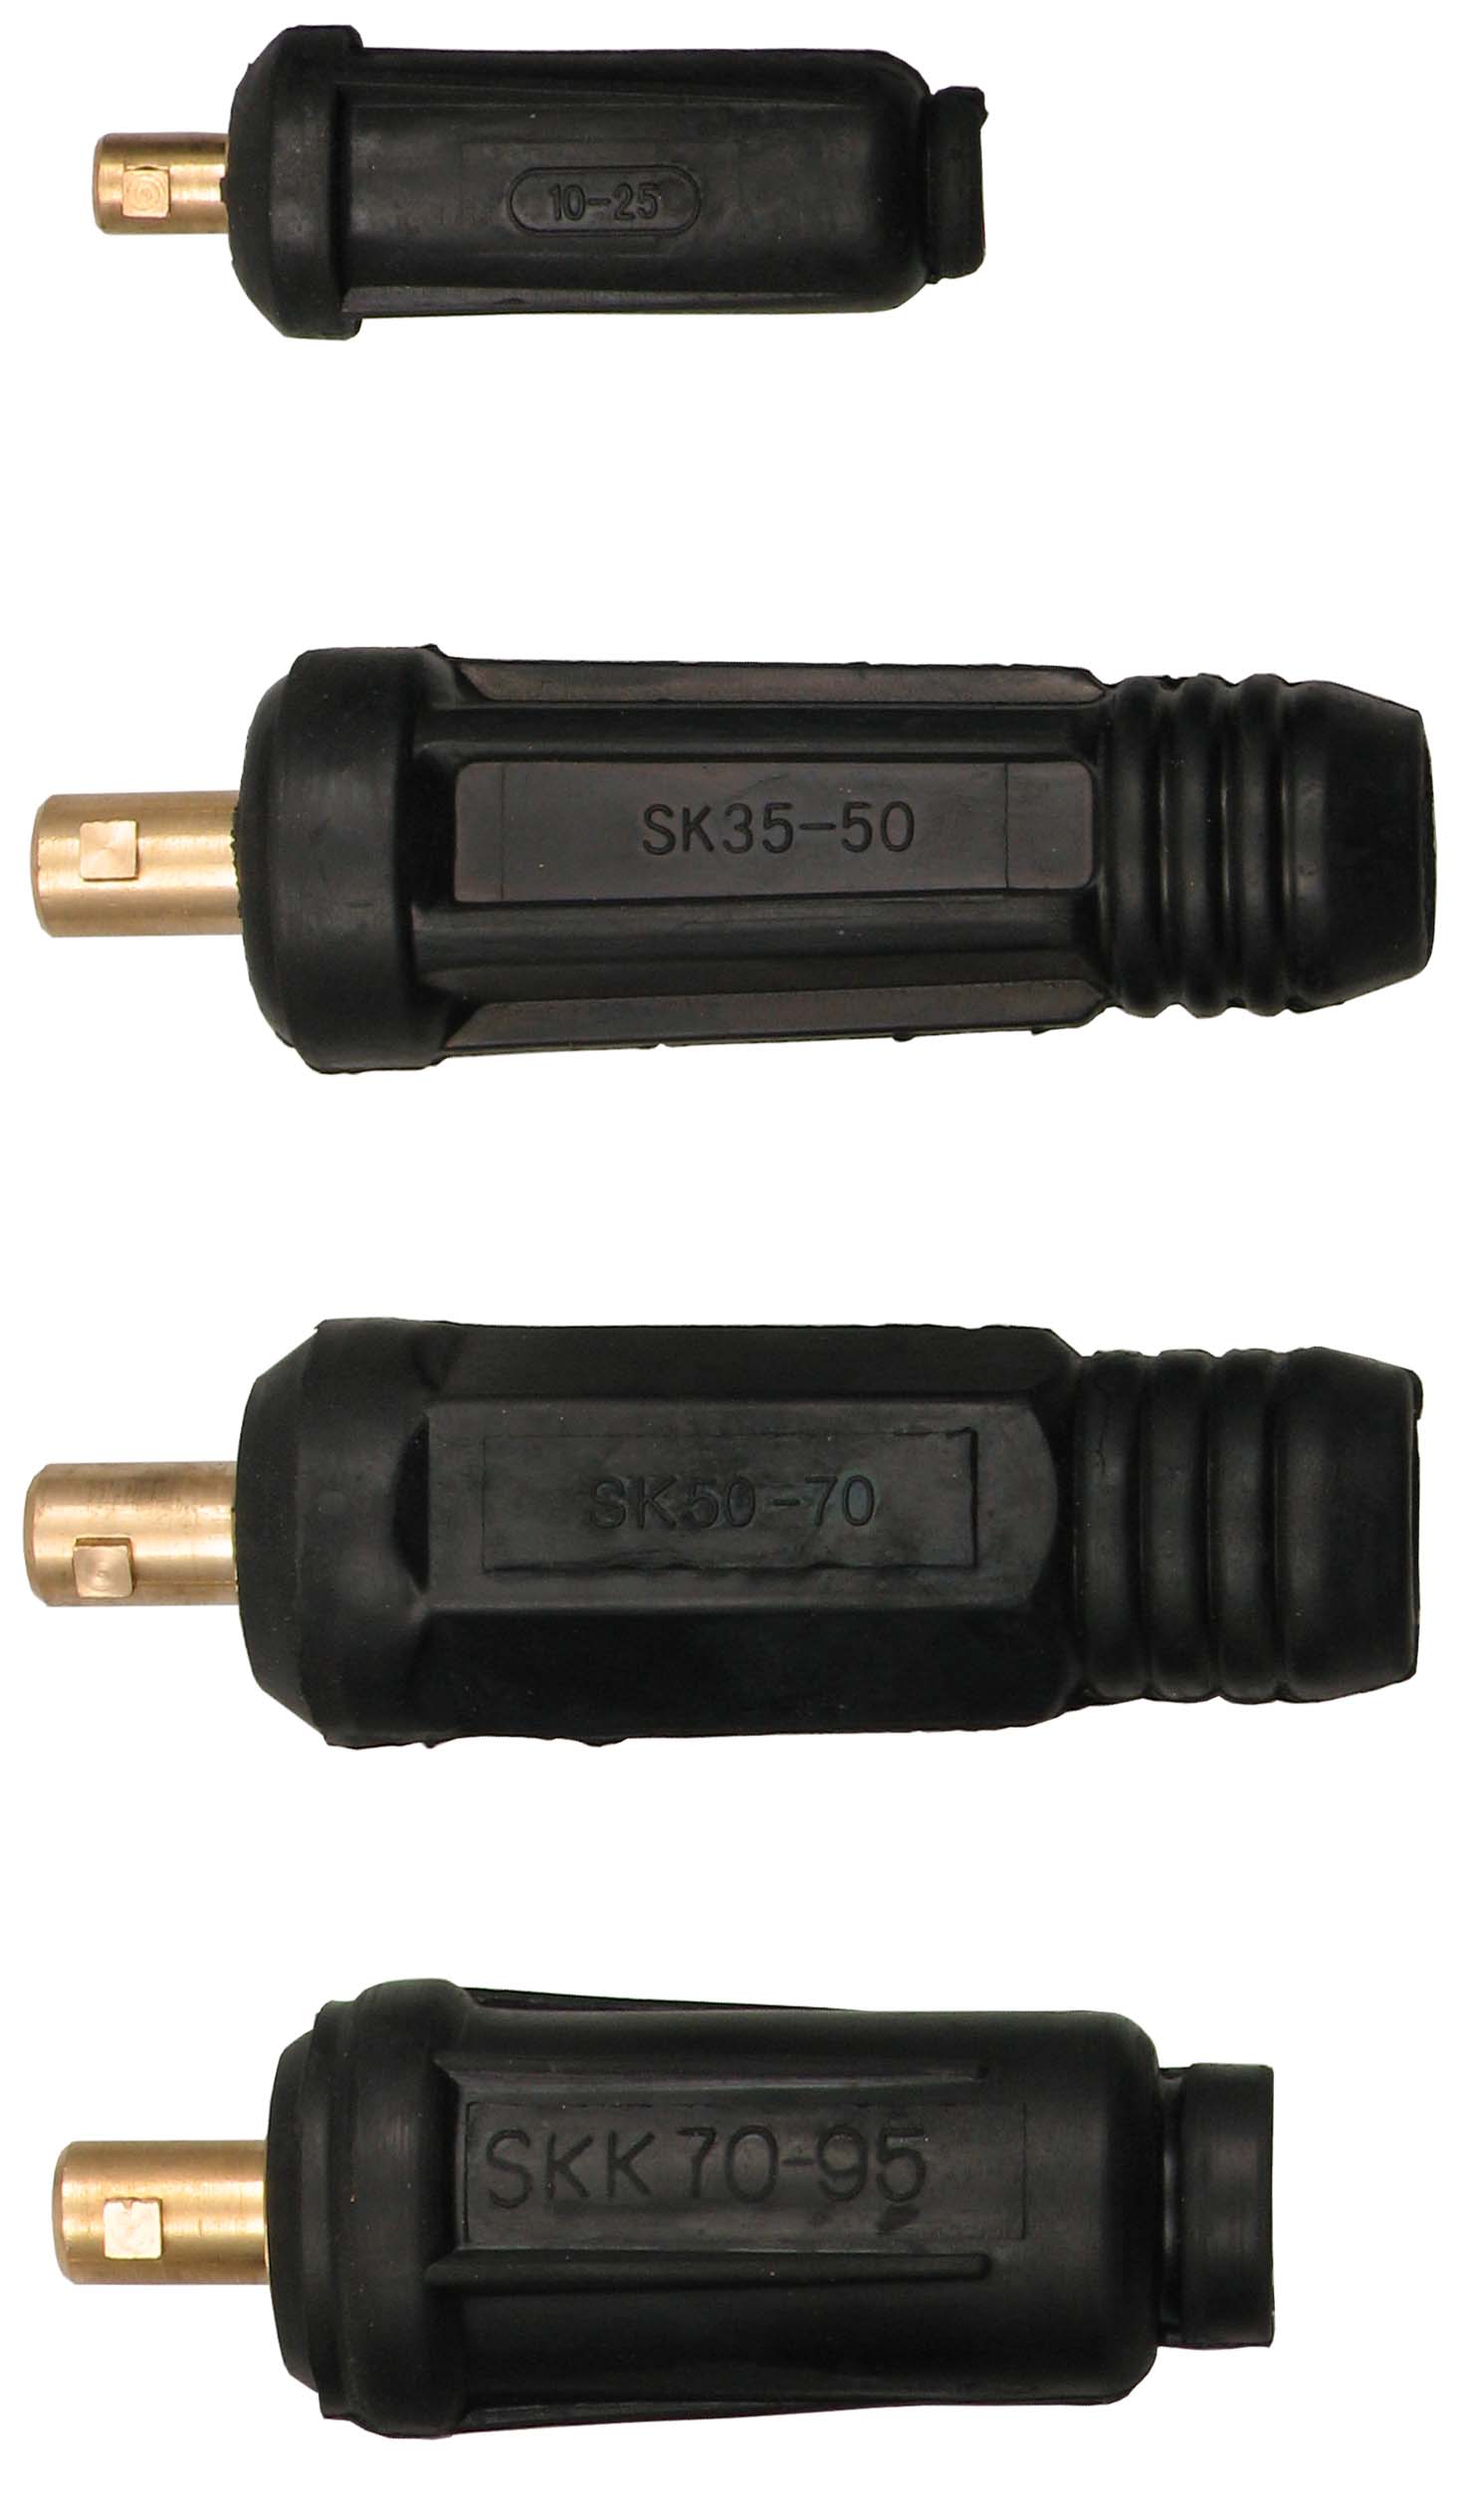 Gallery of Dinse Connector.